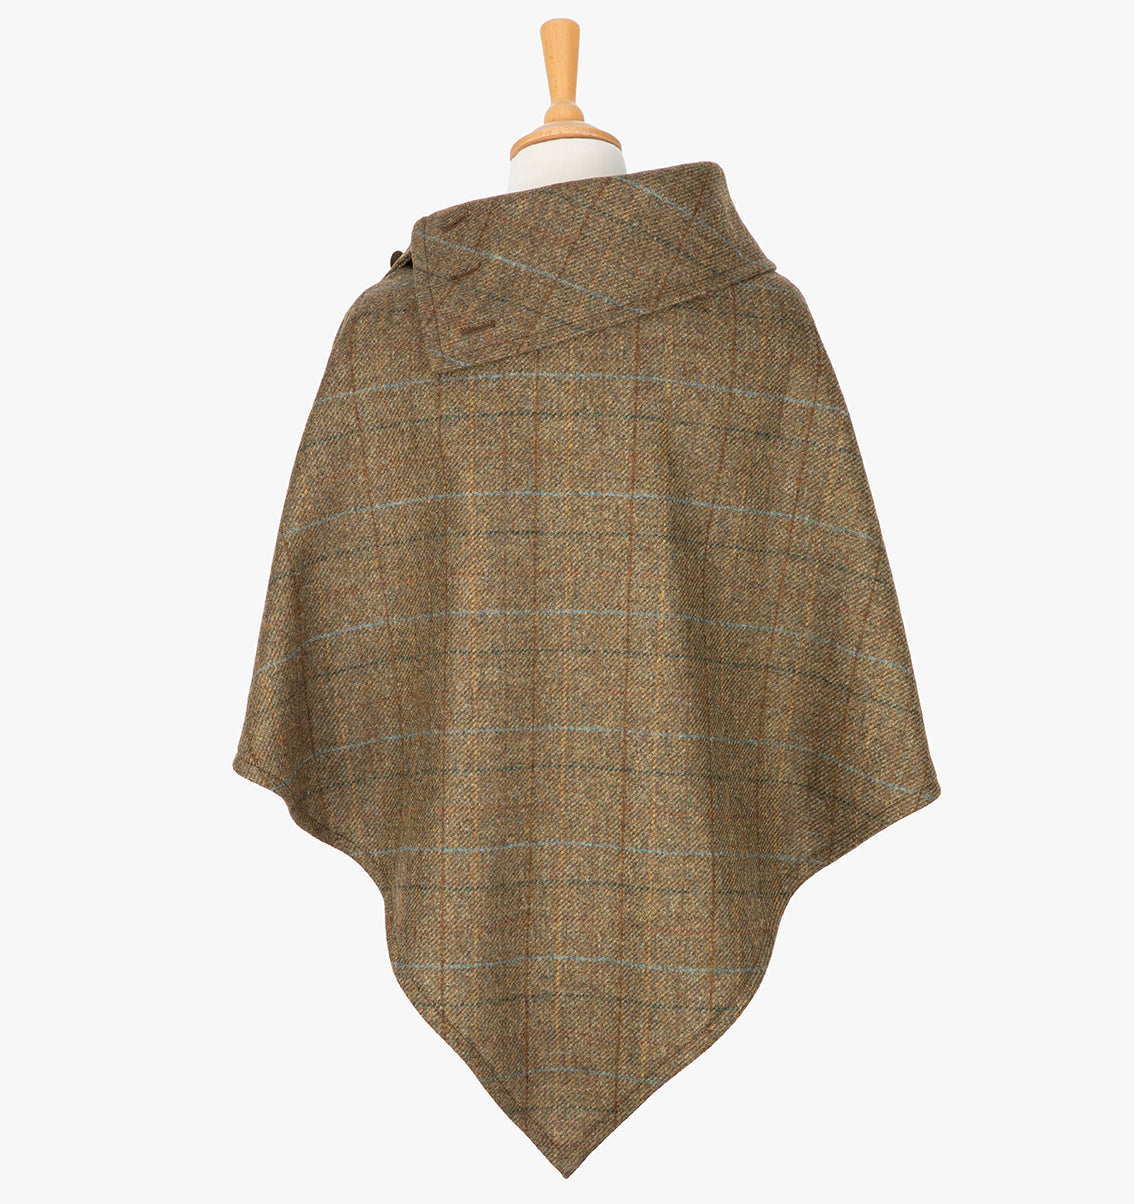 Rear view of the Earth poncho, this drops over the head and drapes gently over the shoulders. It comes mid-way down the arms and finishes at a point at the back. The colour is  brown with a black, brown and blue overcheck. It has a folded collar with 3 button holes on the left.